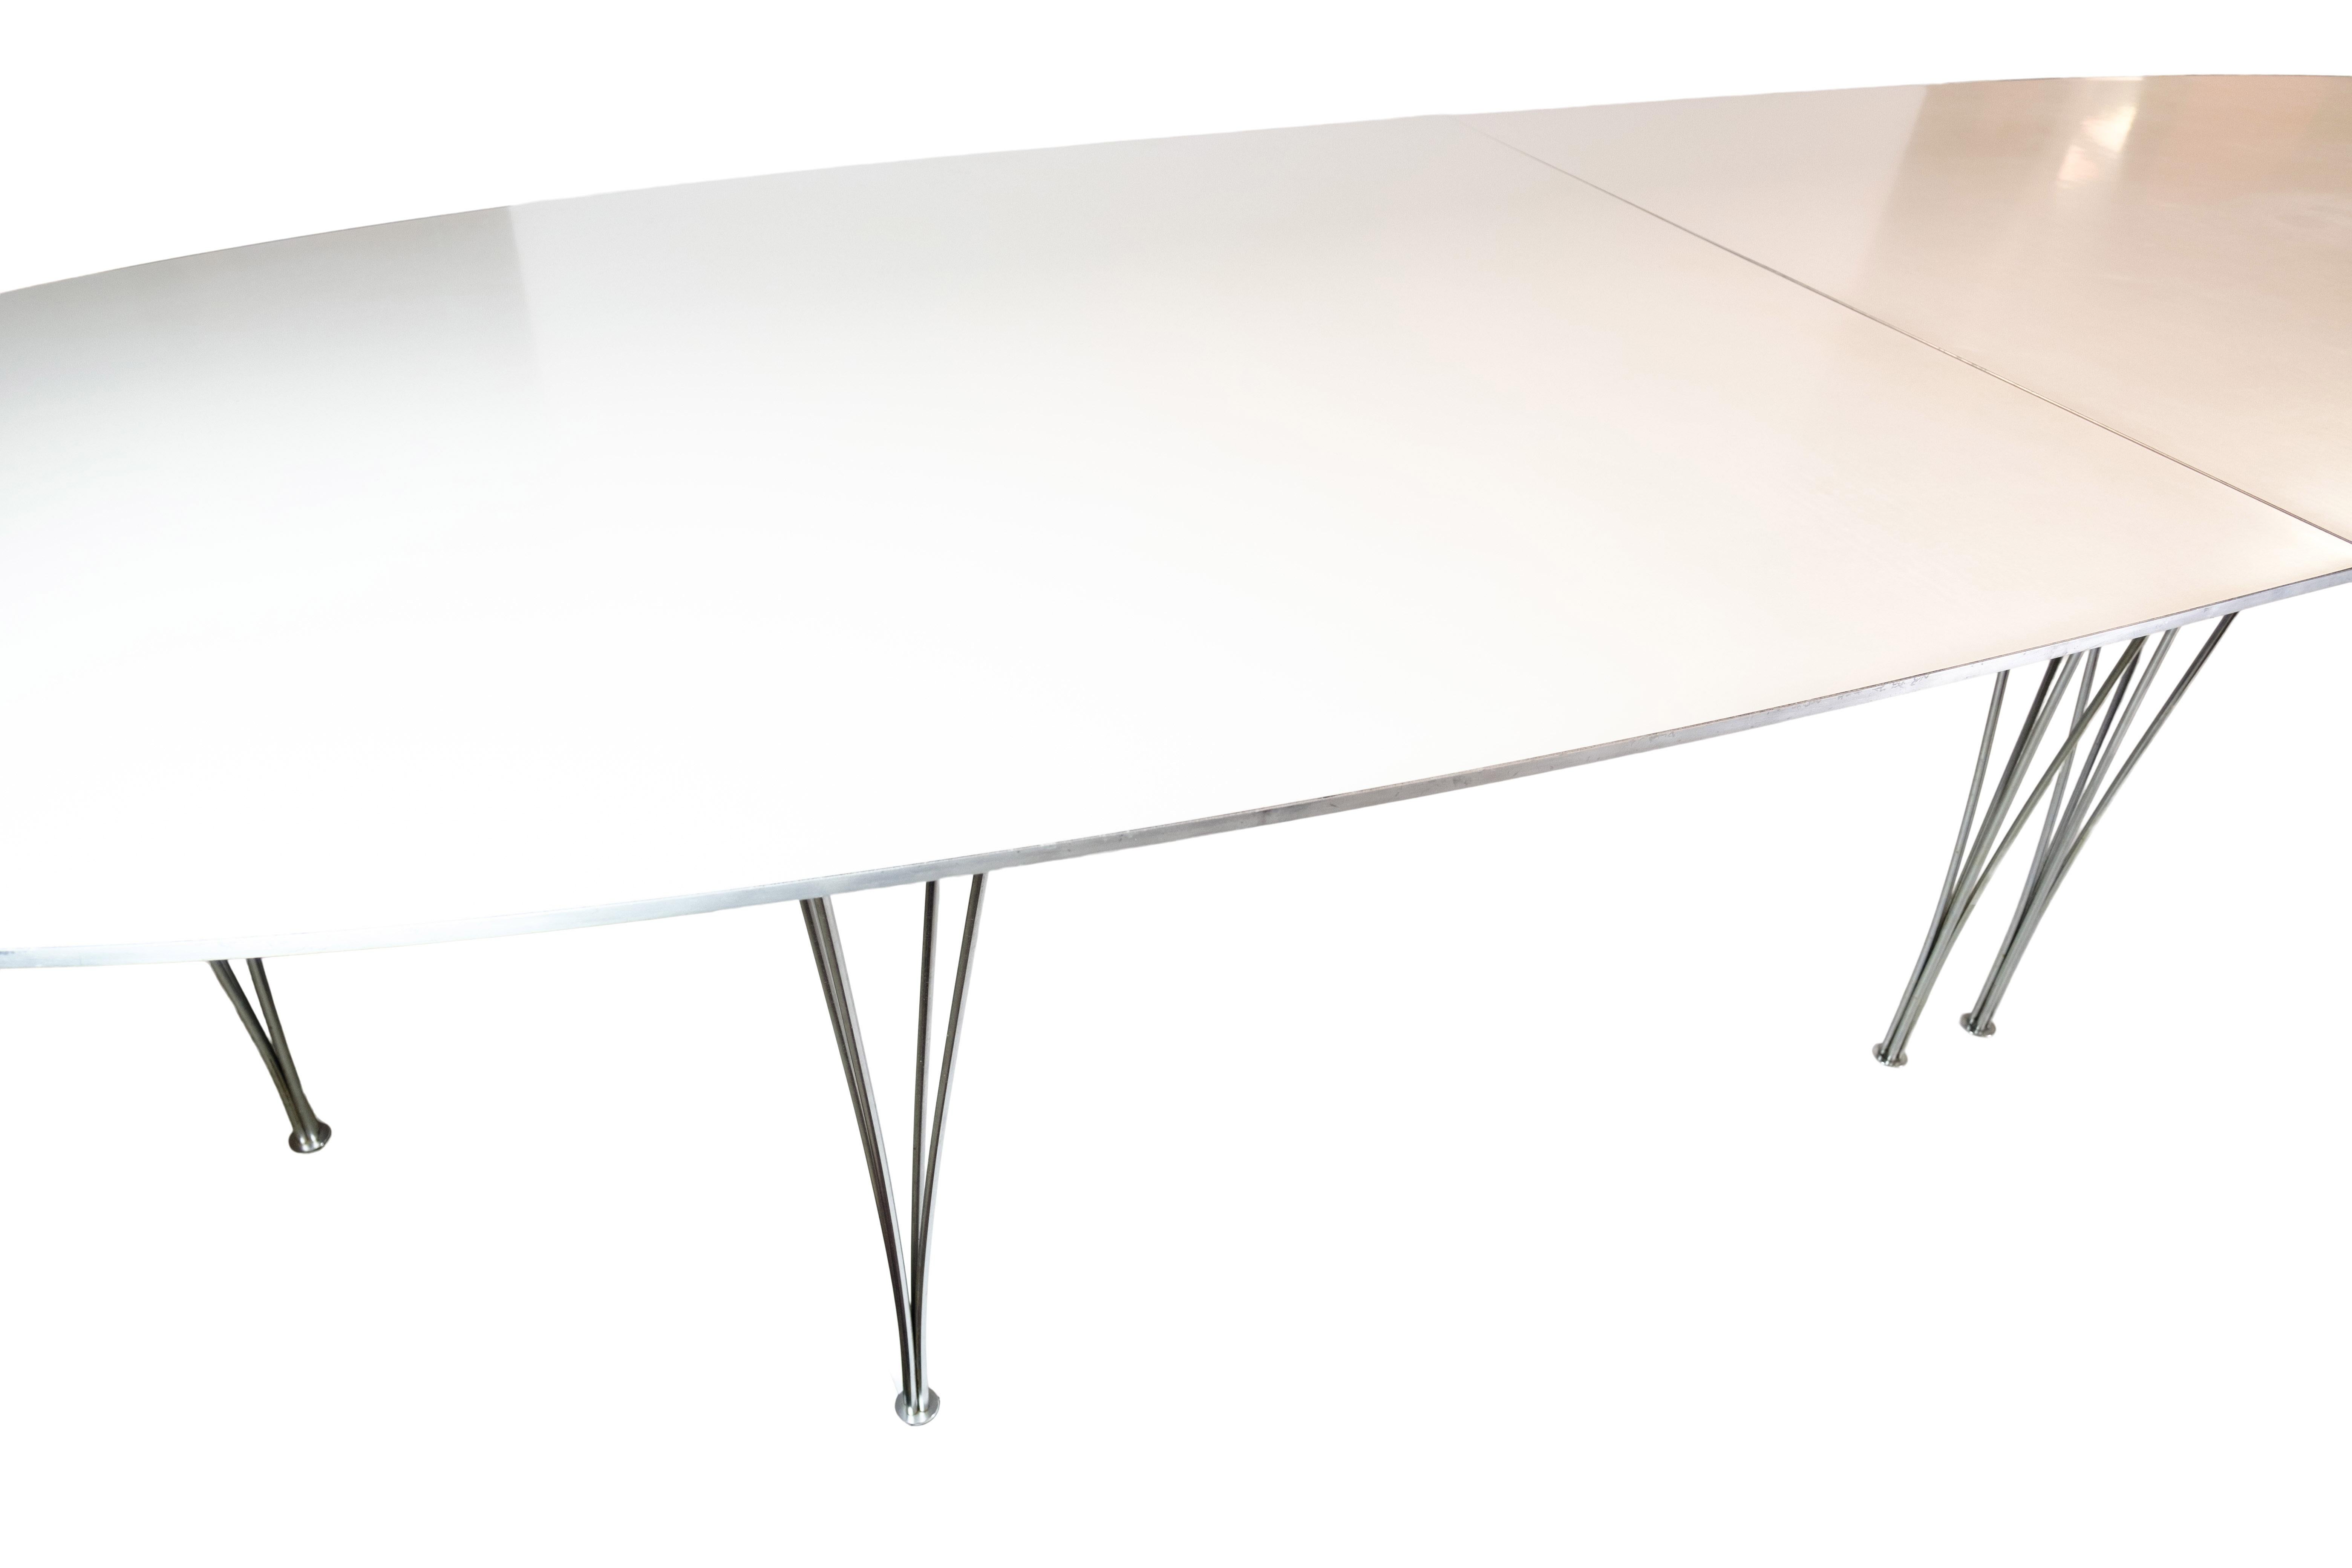  the Super Ellipse conference table, crafted in 1979 by the renowned designers Piet Hein and Bruno Mathsson and manufactured by Fritz Hansen. This stunning table features a sleek white laminate surface with an aluminum edge, exuding a modern and